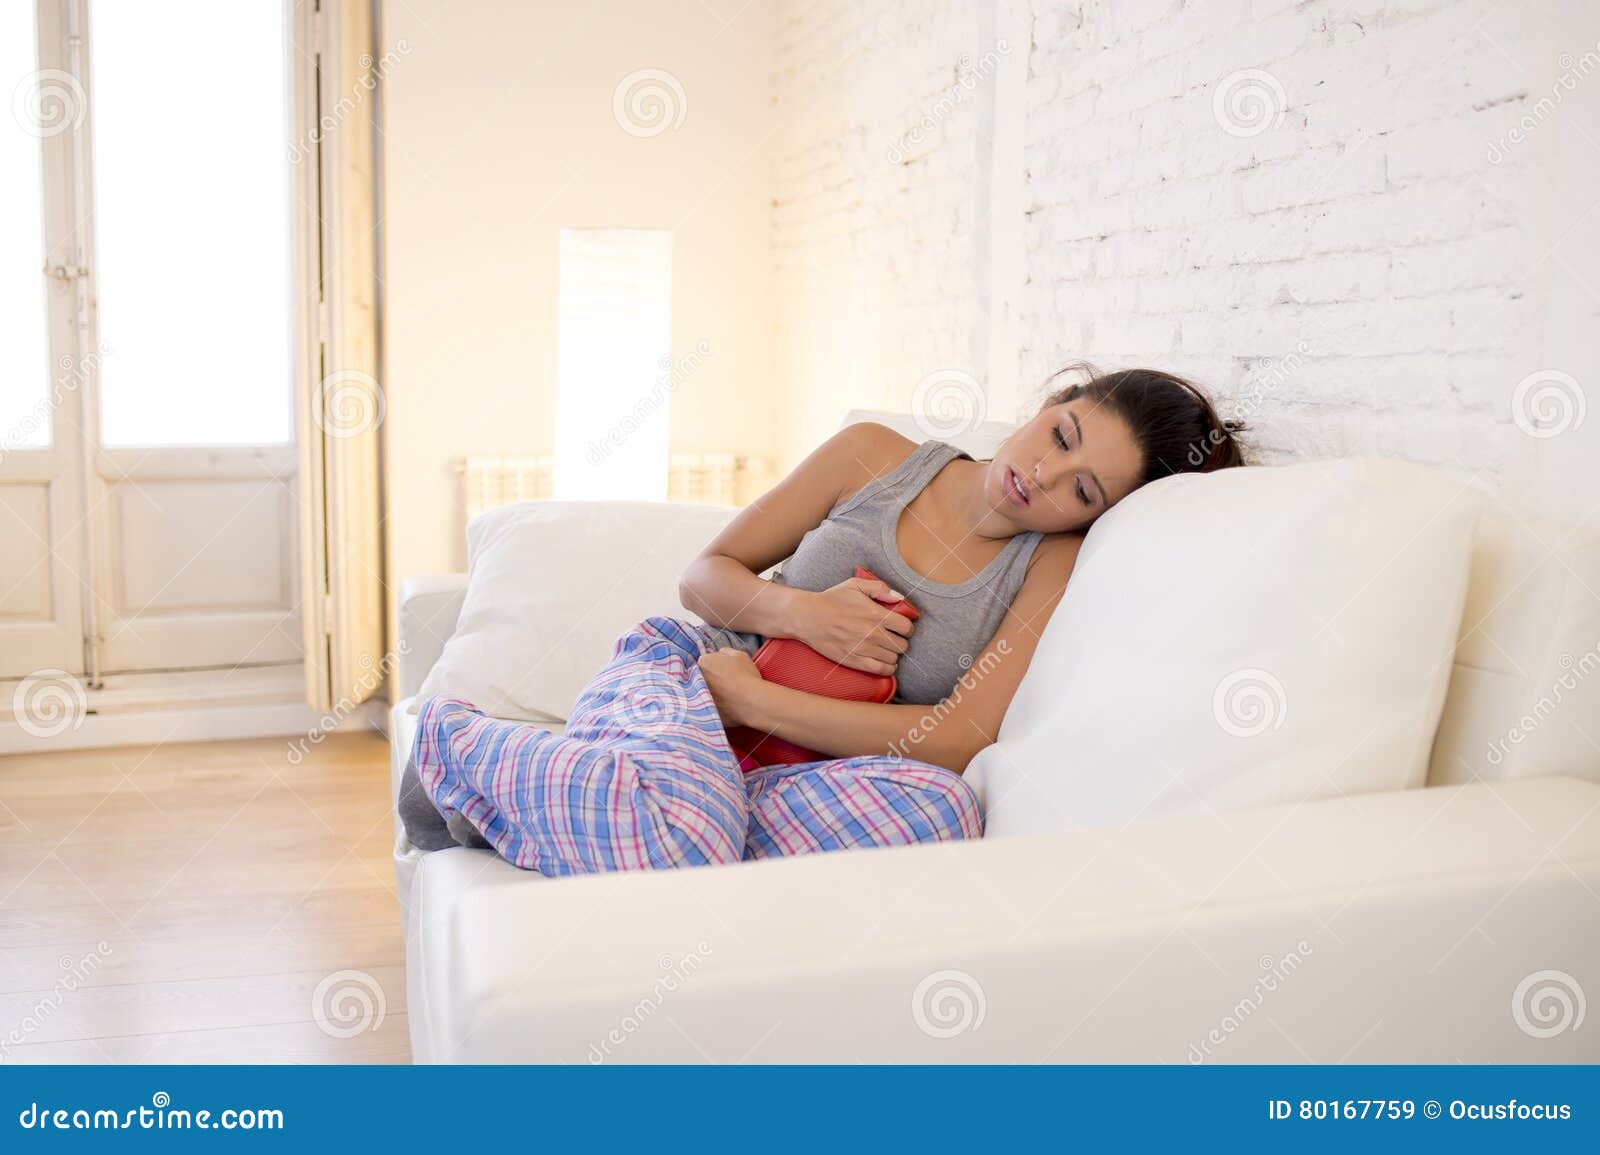 young beautiful hispanic woman holding hot water bottle against belly suffering menstrual period pain